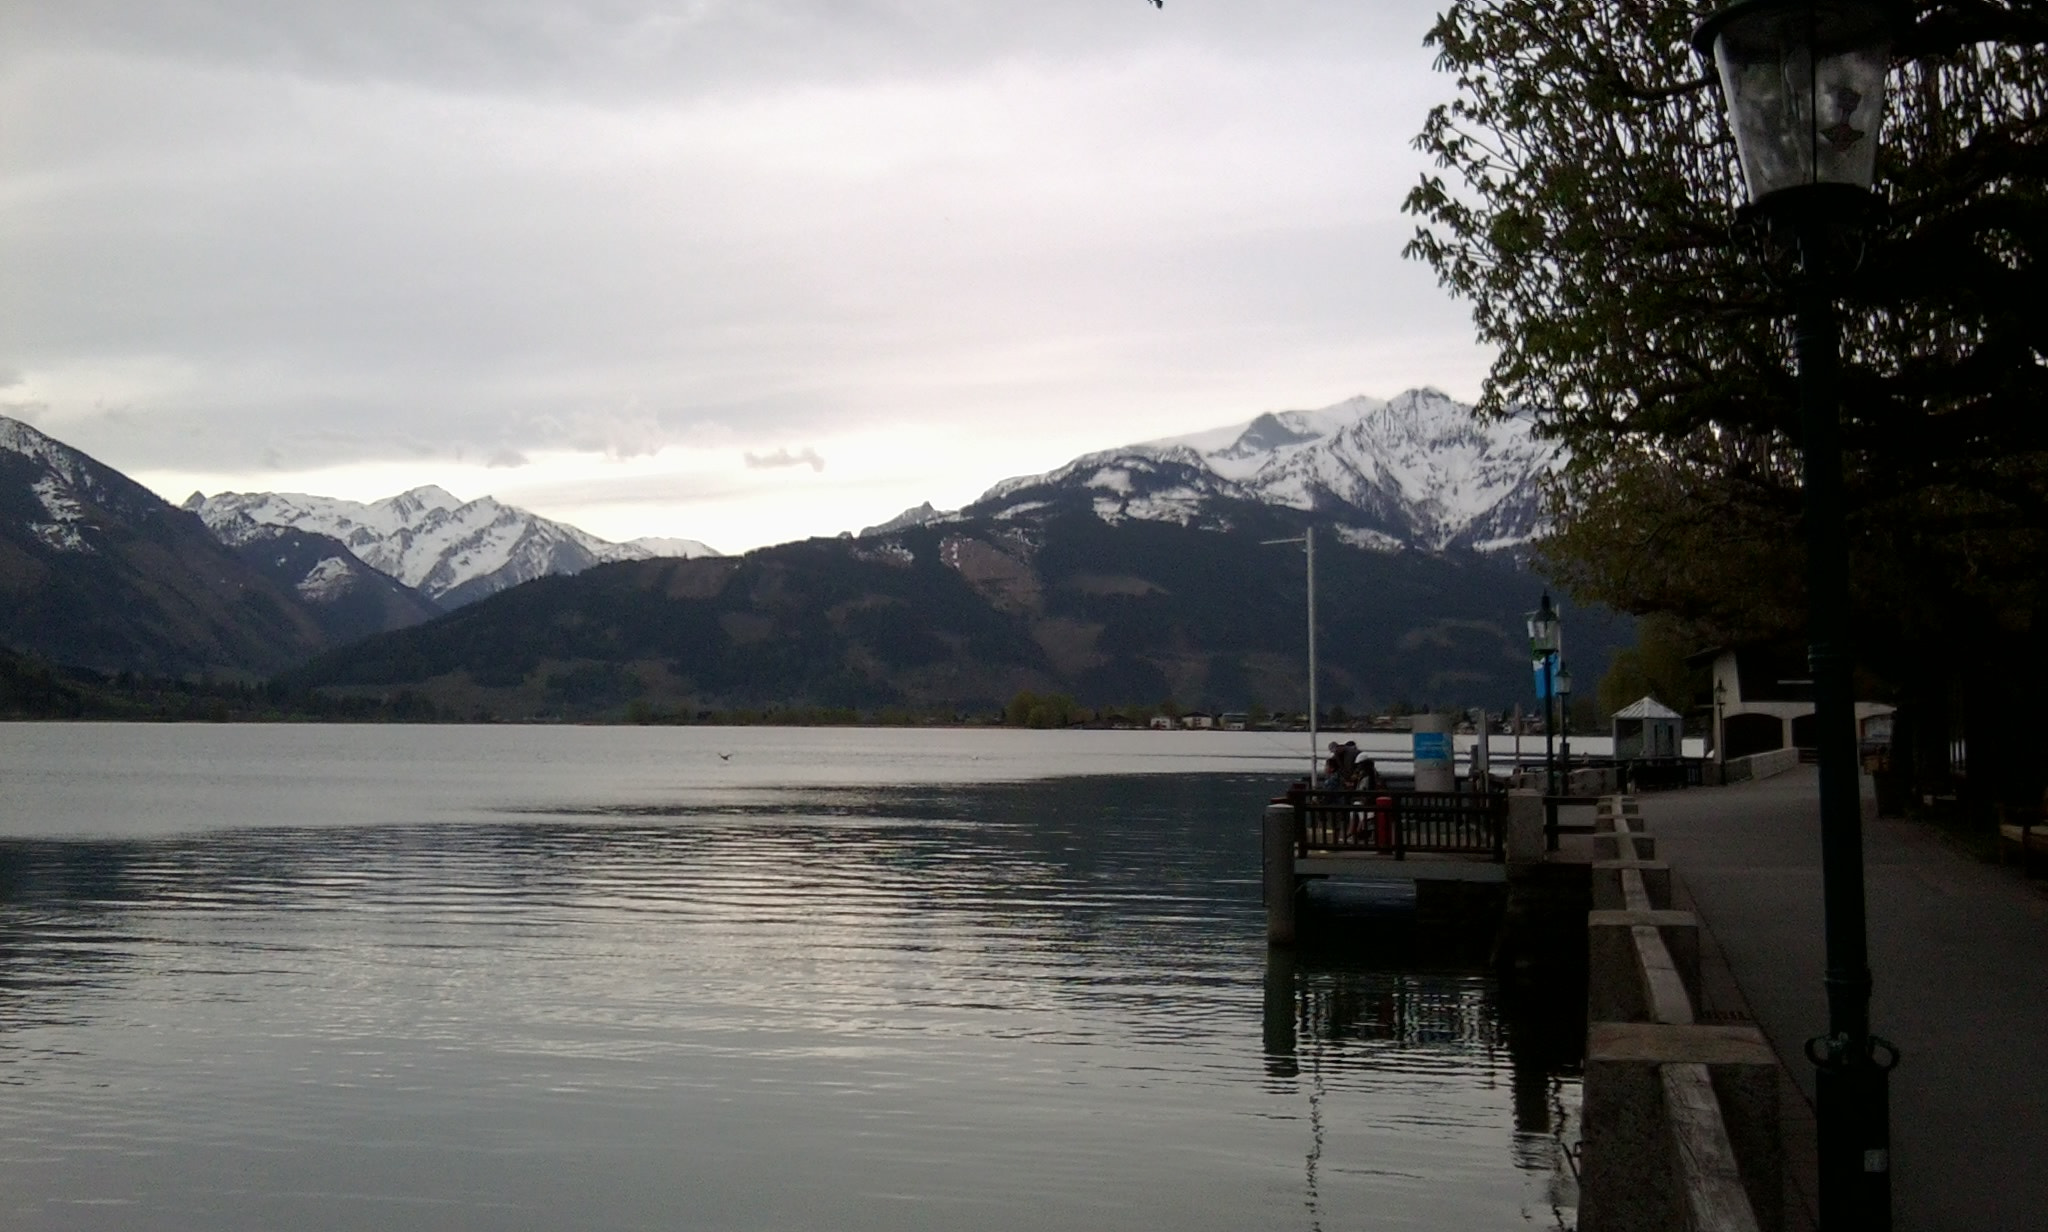 Samsung GT-S5620 sample photo. Zell am see photography